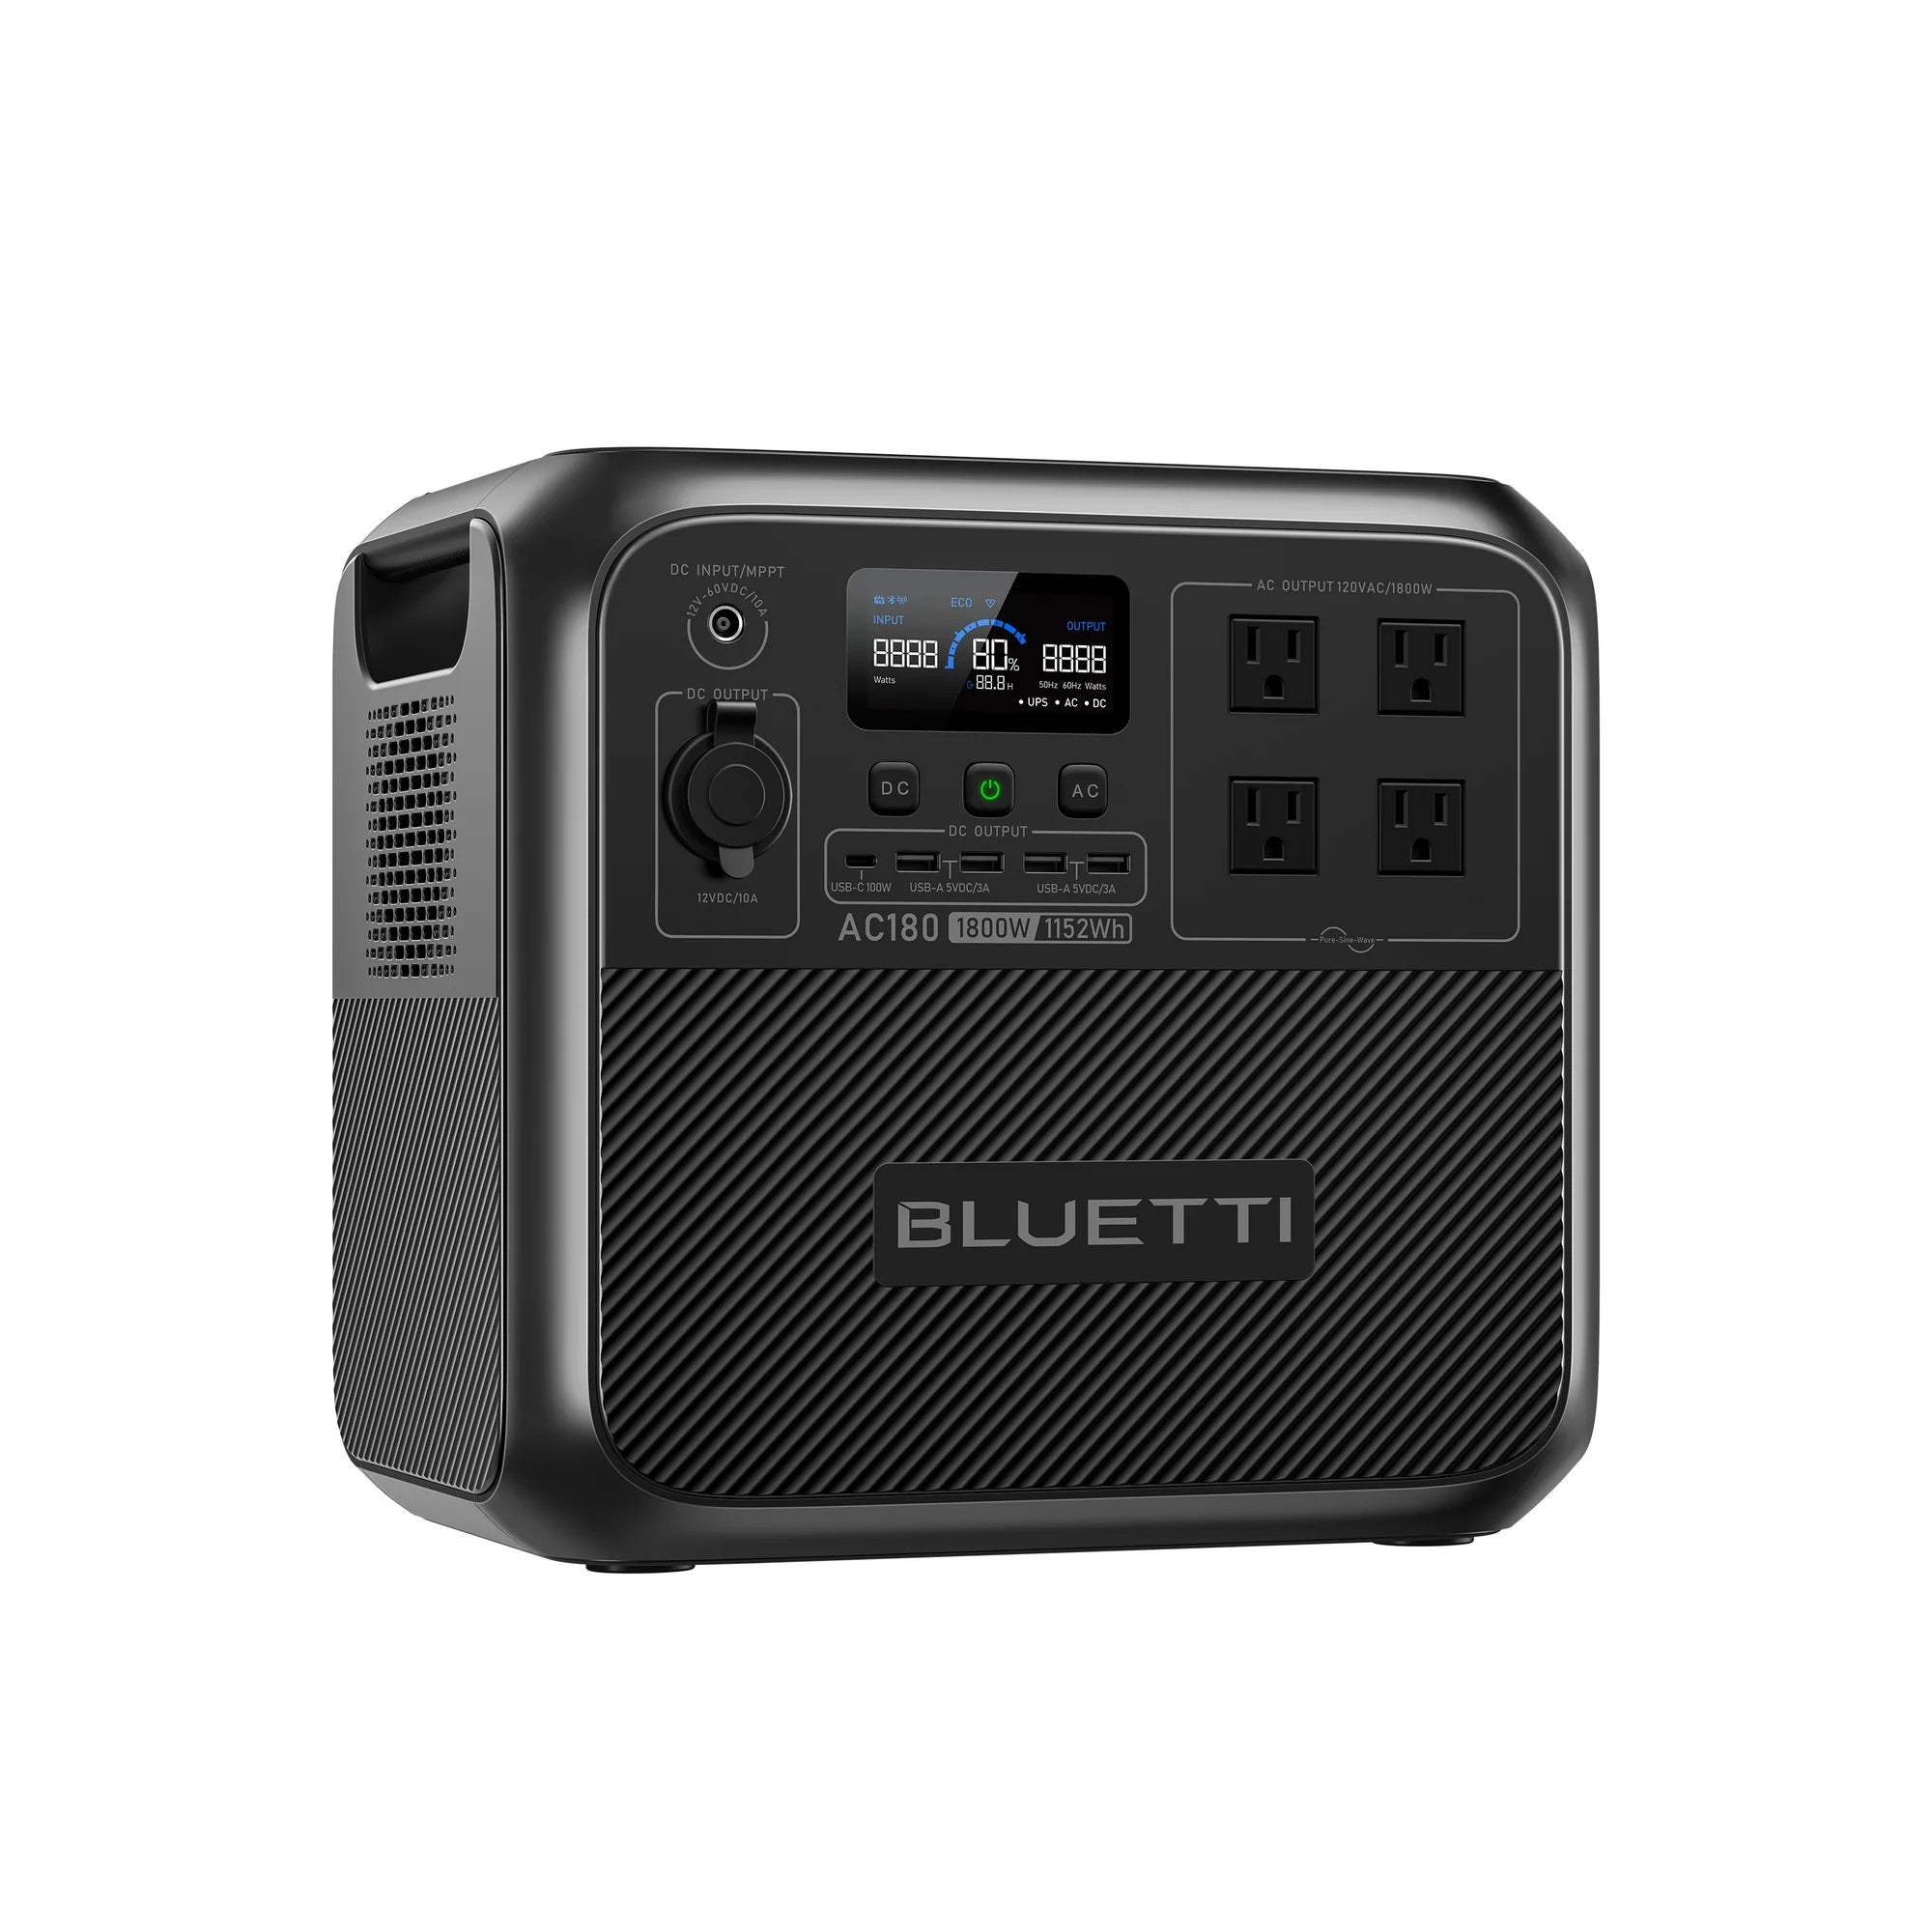 Bluetti Portable Power Station Ac180 Sideview